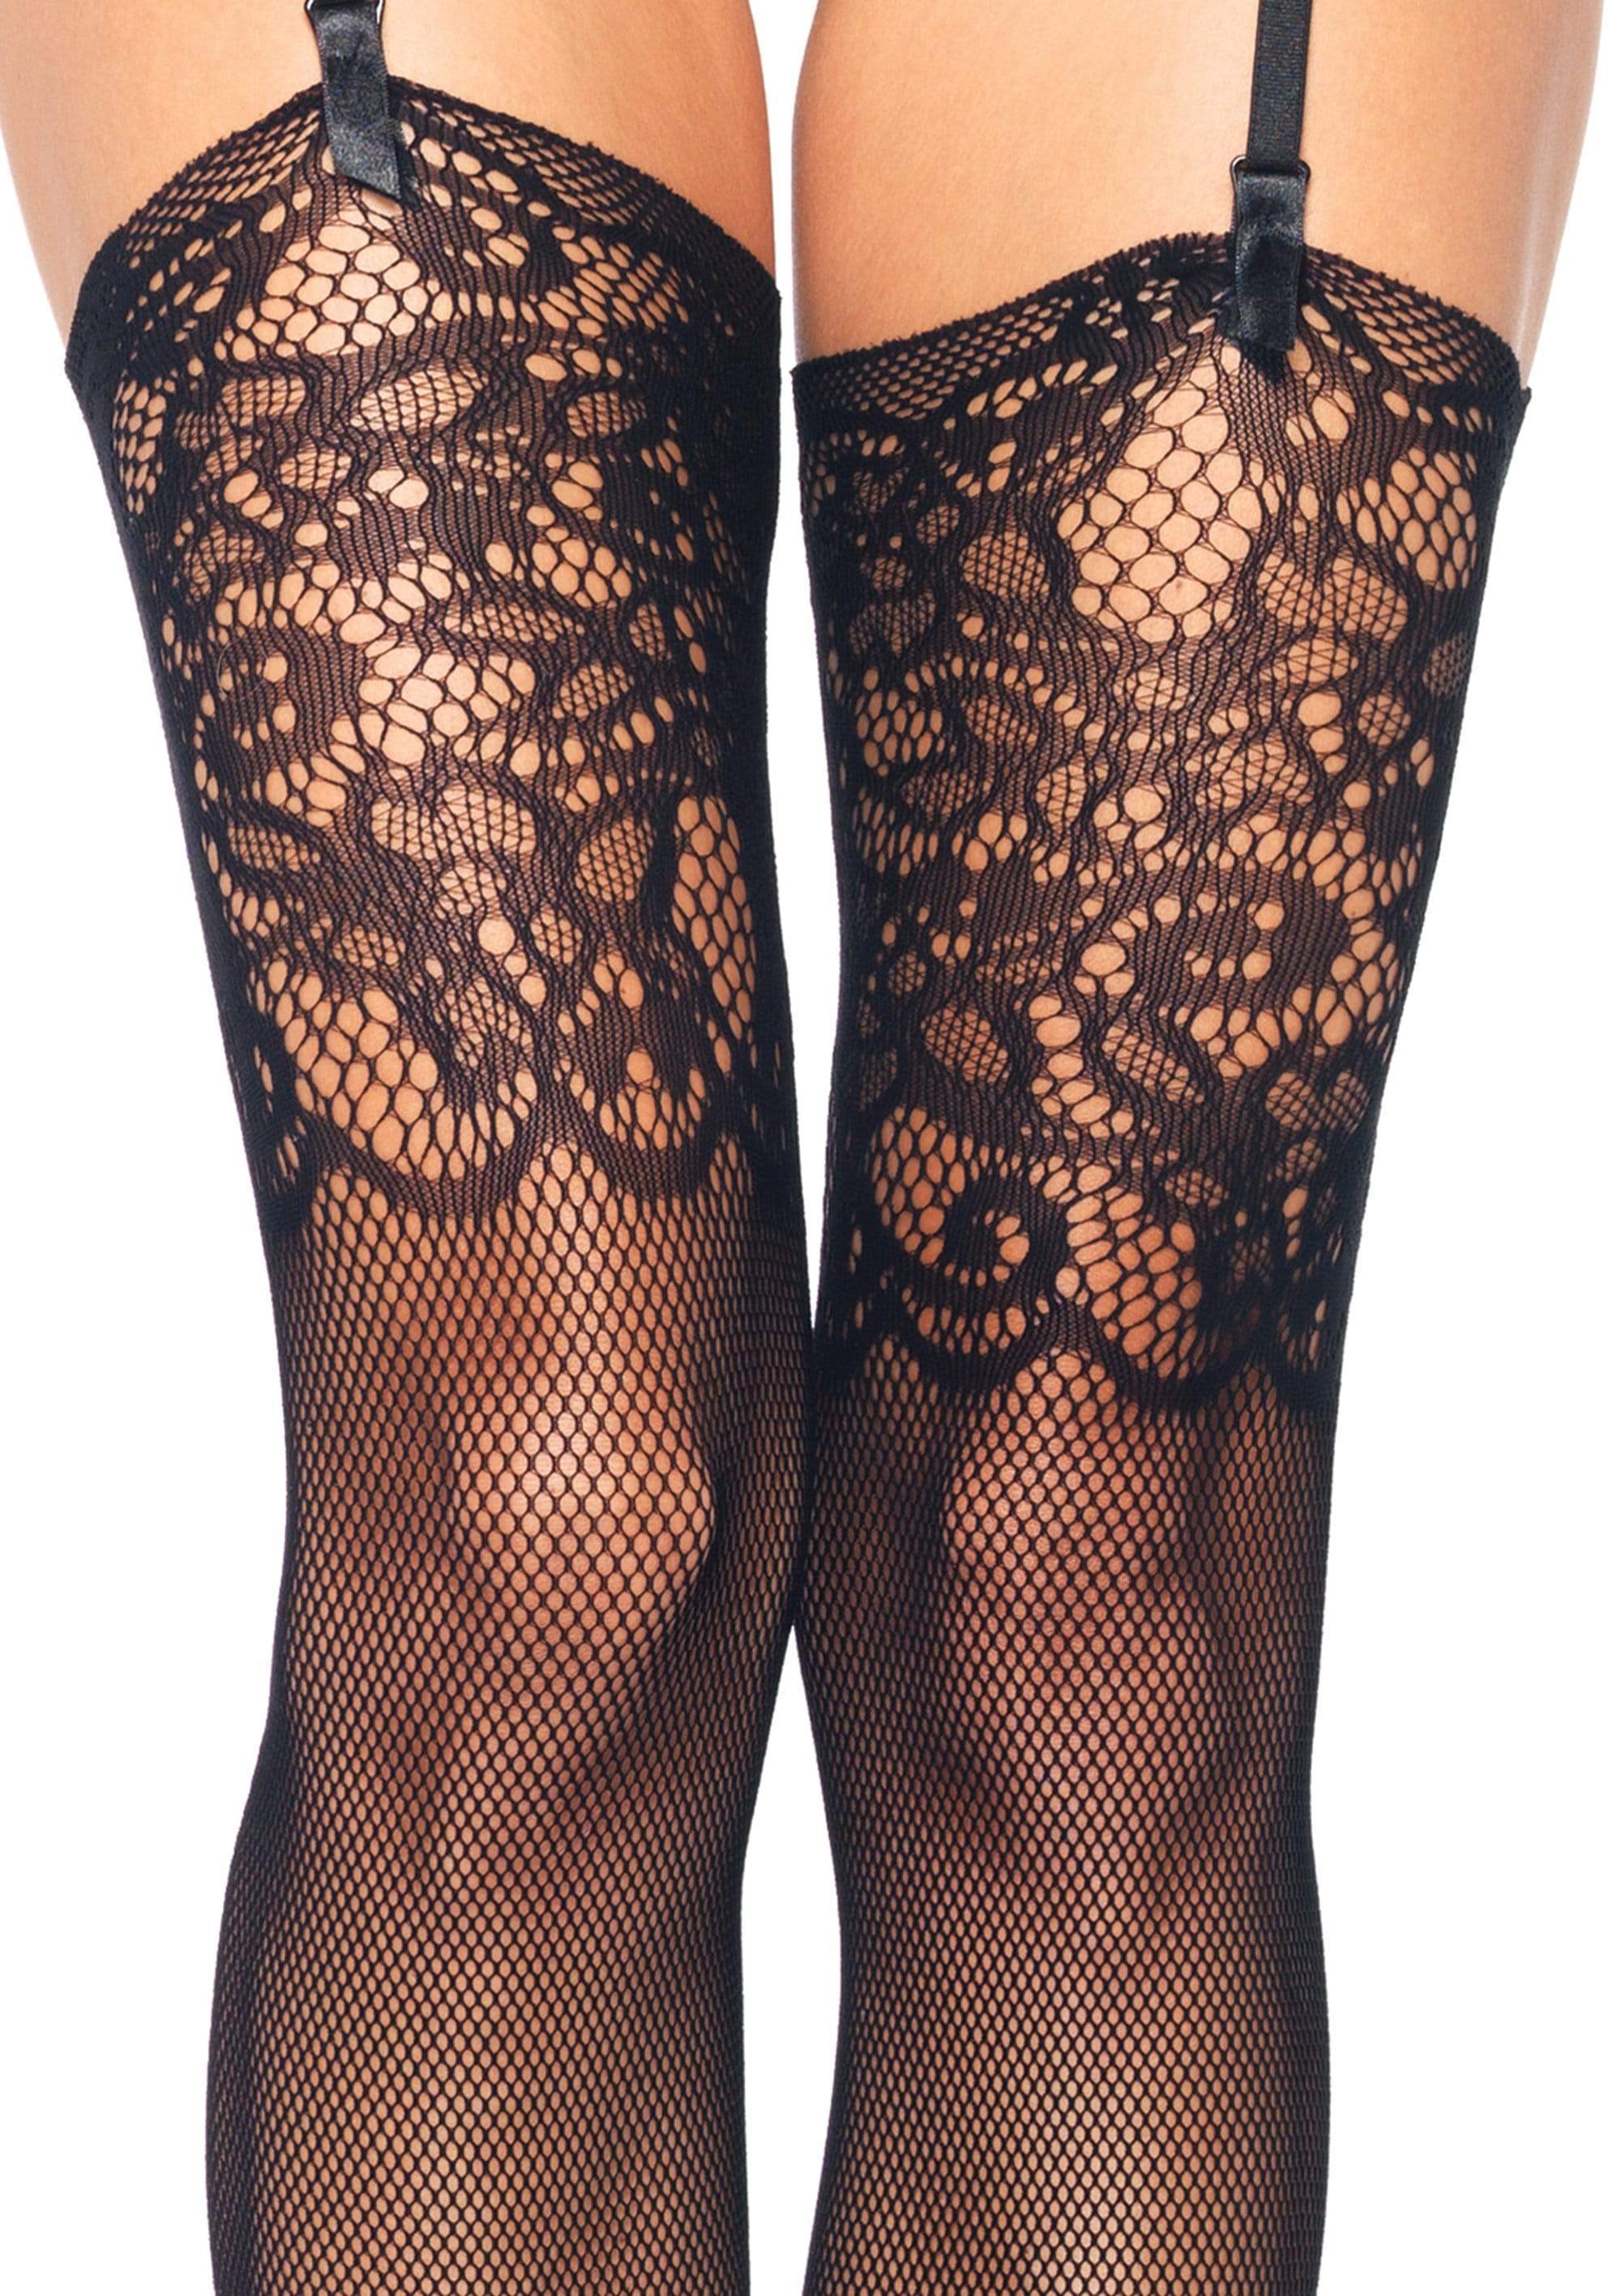 Lace Top Fishnet Stockings, Womens Sexy Hosiery